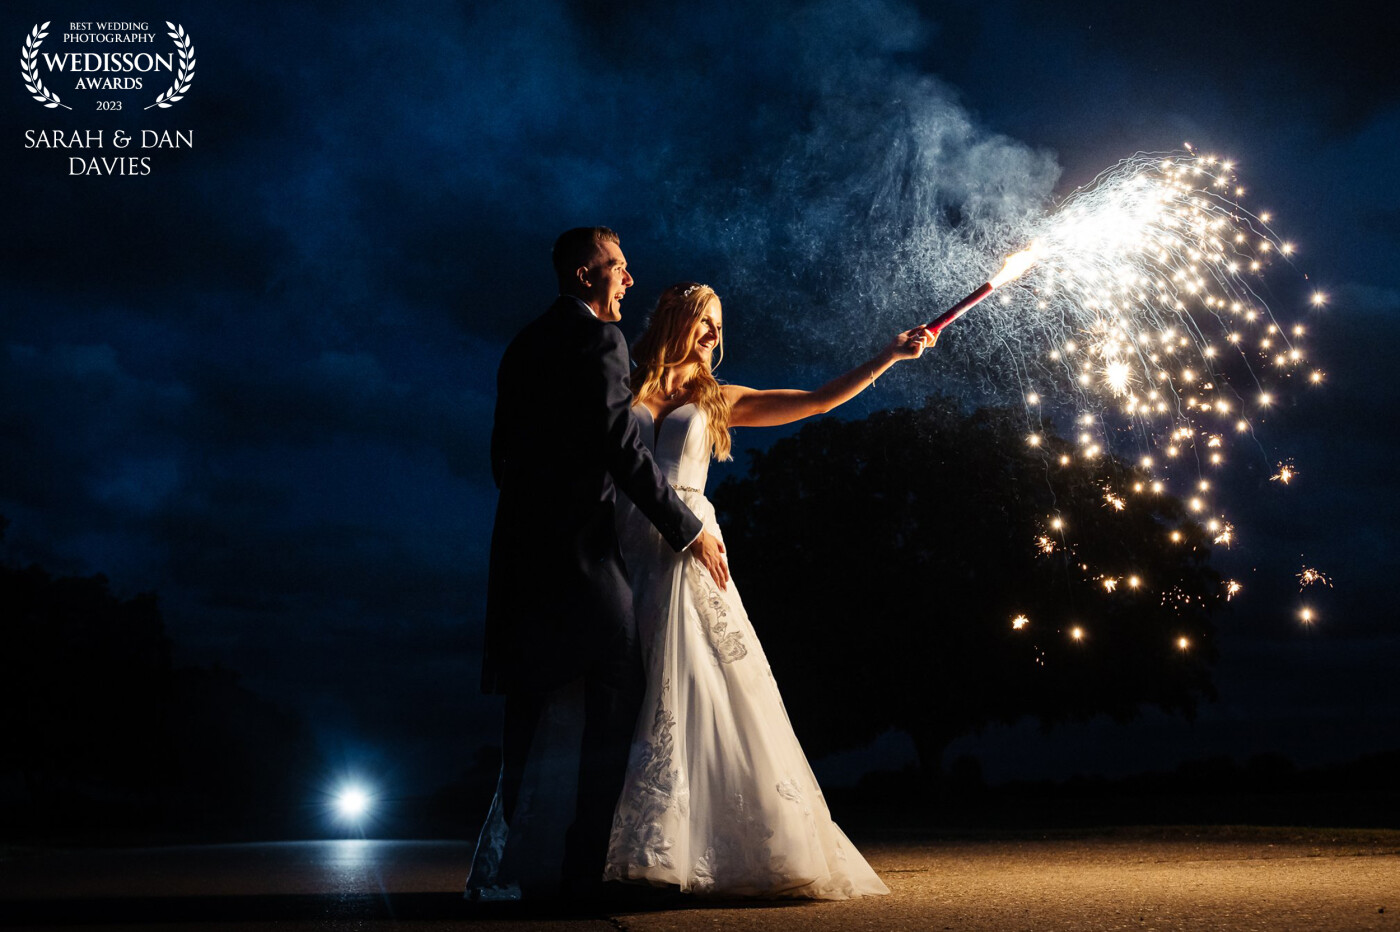 We were told they had smoke bombs to use after sparklers, and they ended up being flares (!) it looked amazing though